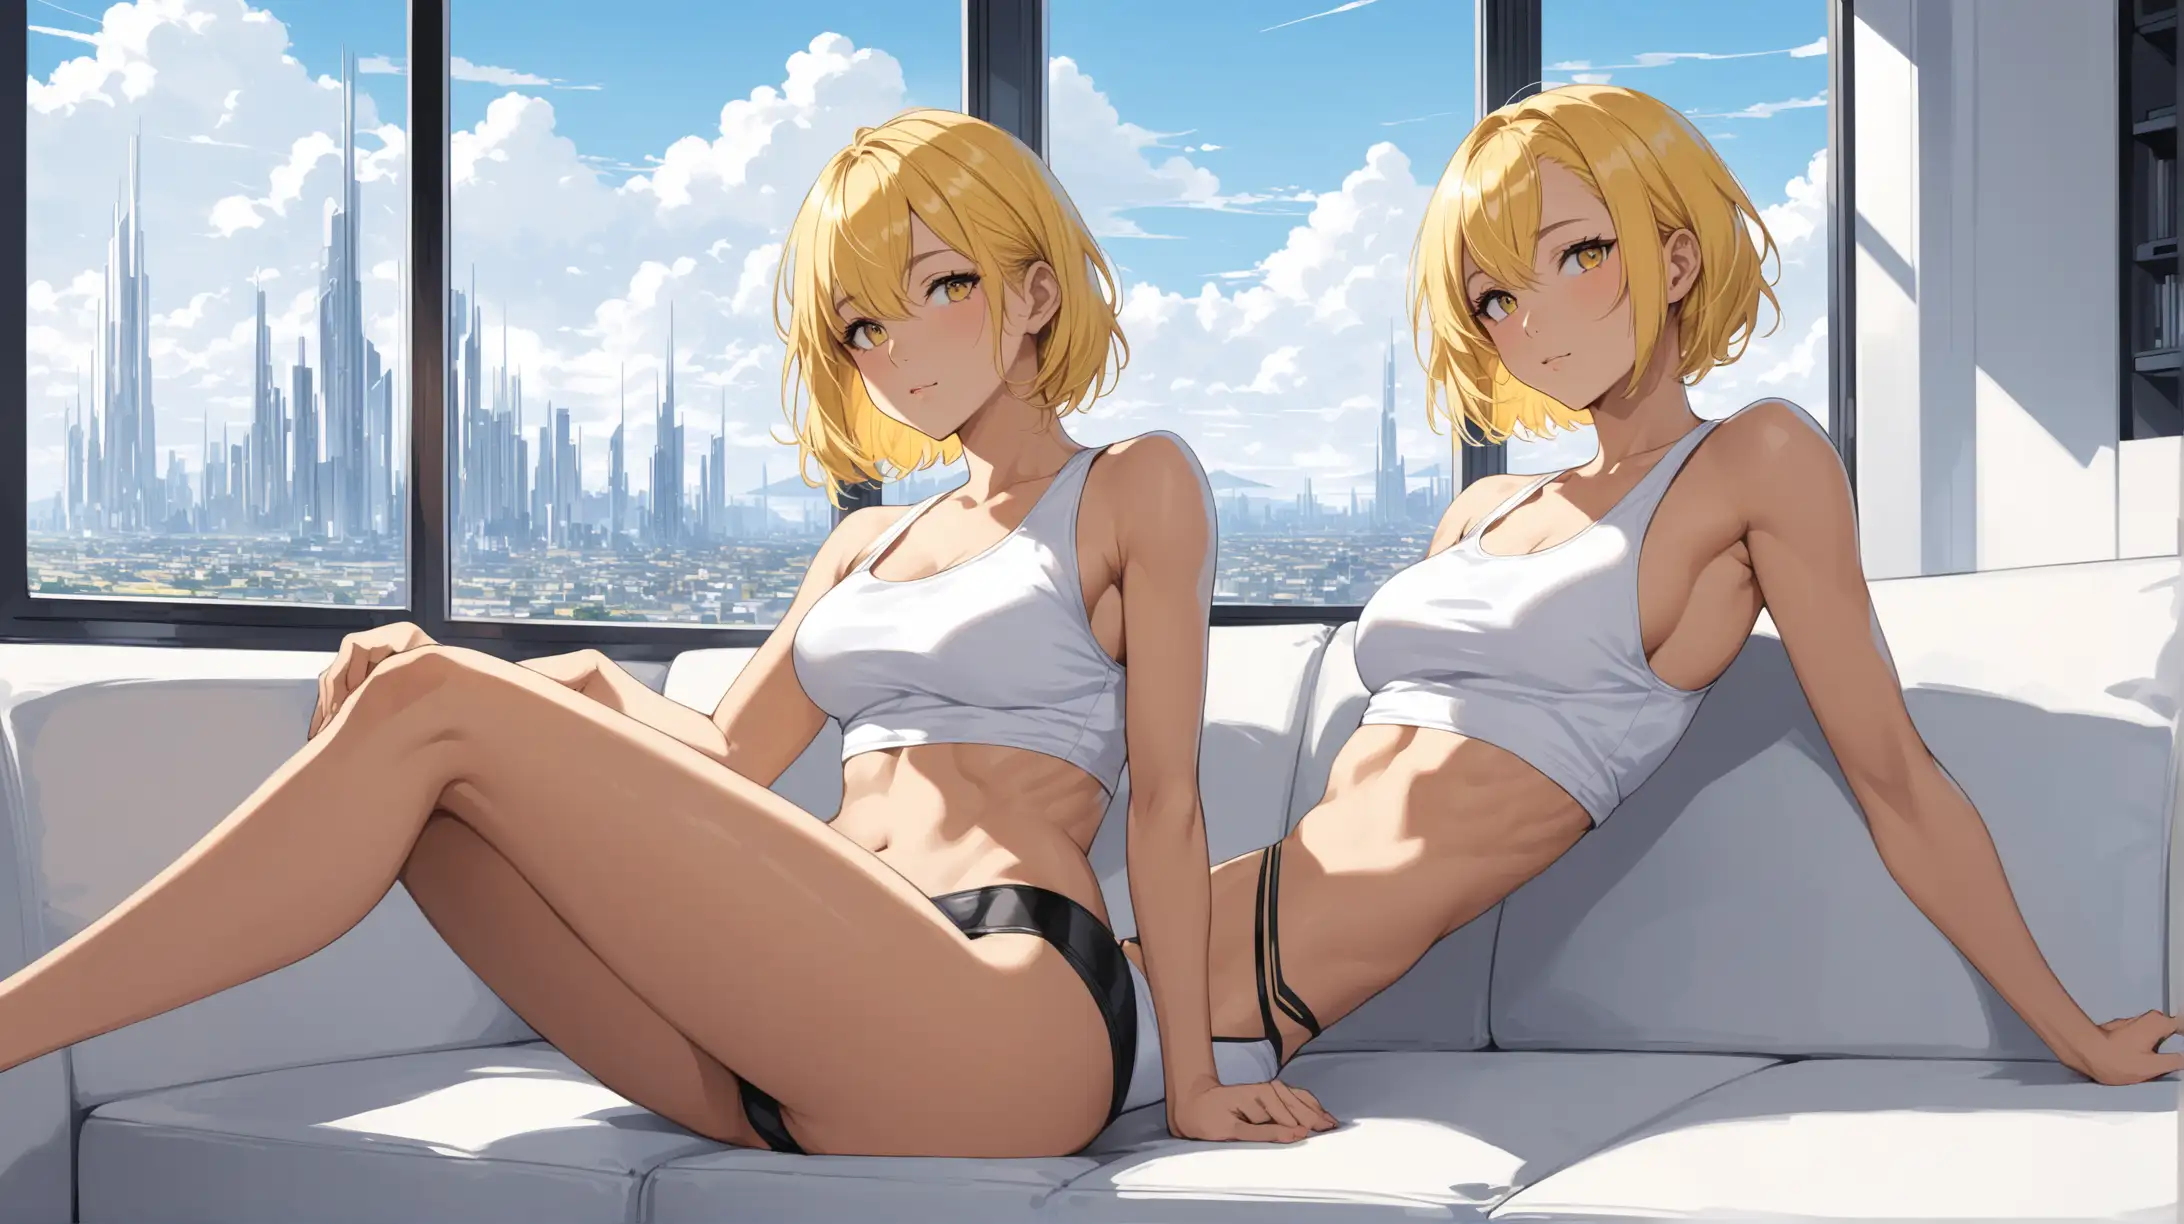 sexy fit 24 year old hero girl, short chin length yellow hair, reclining on couch in futuristic apartment, wearing short white tank top, black panties, toned body, sexy midriff, blue sky and futuristic town in background through window, yellow black white 3 color minimal design